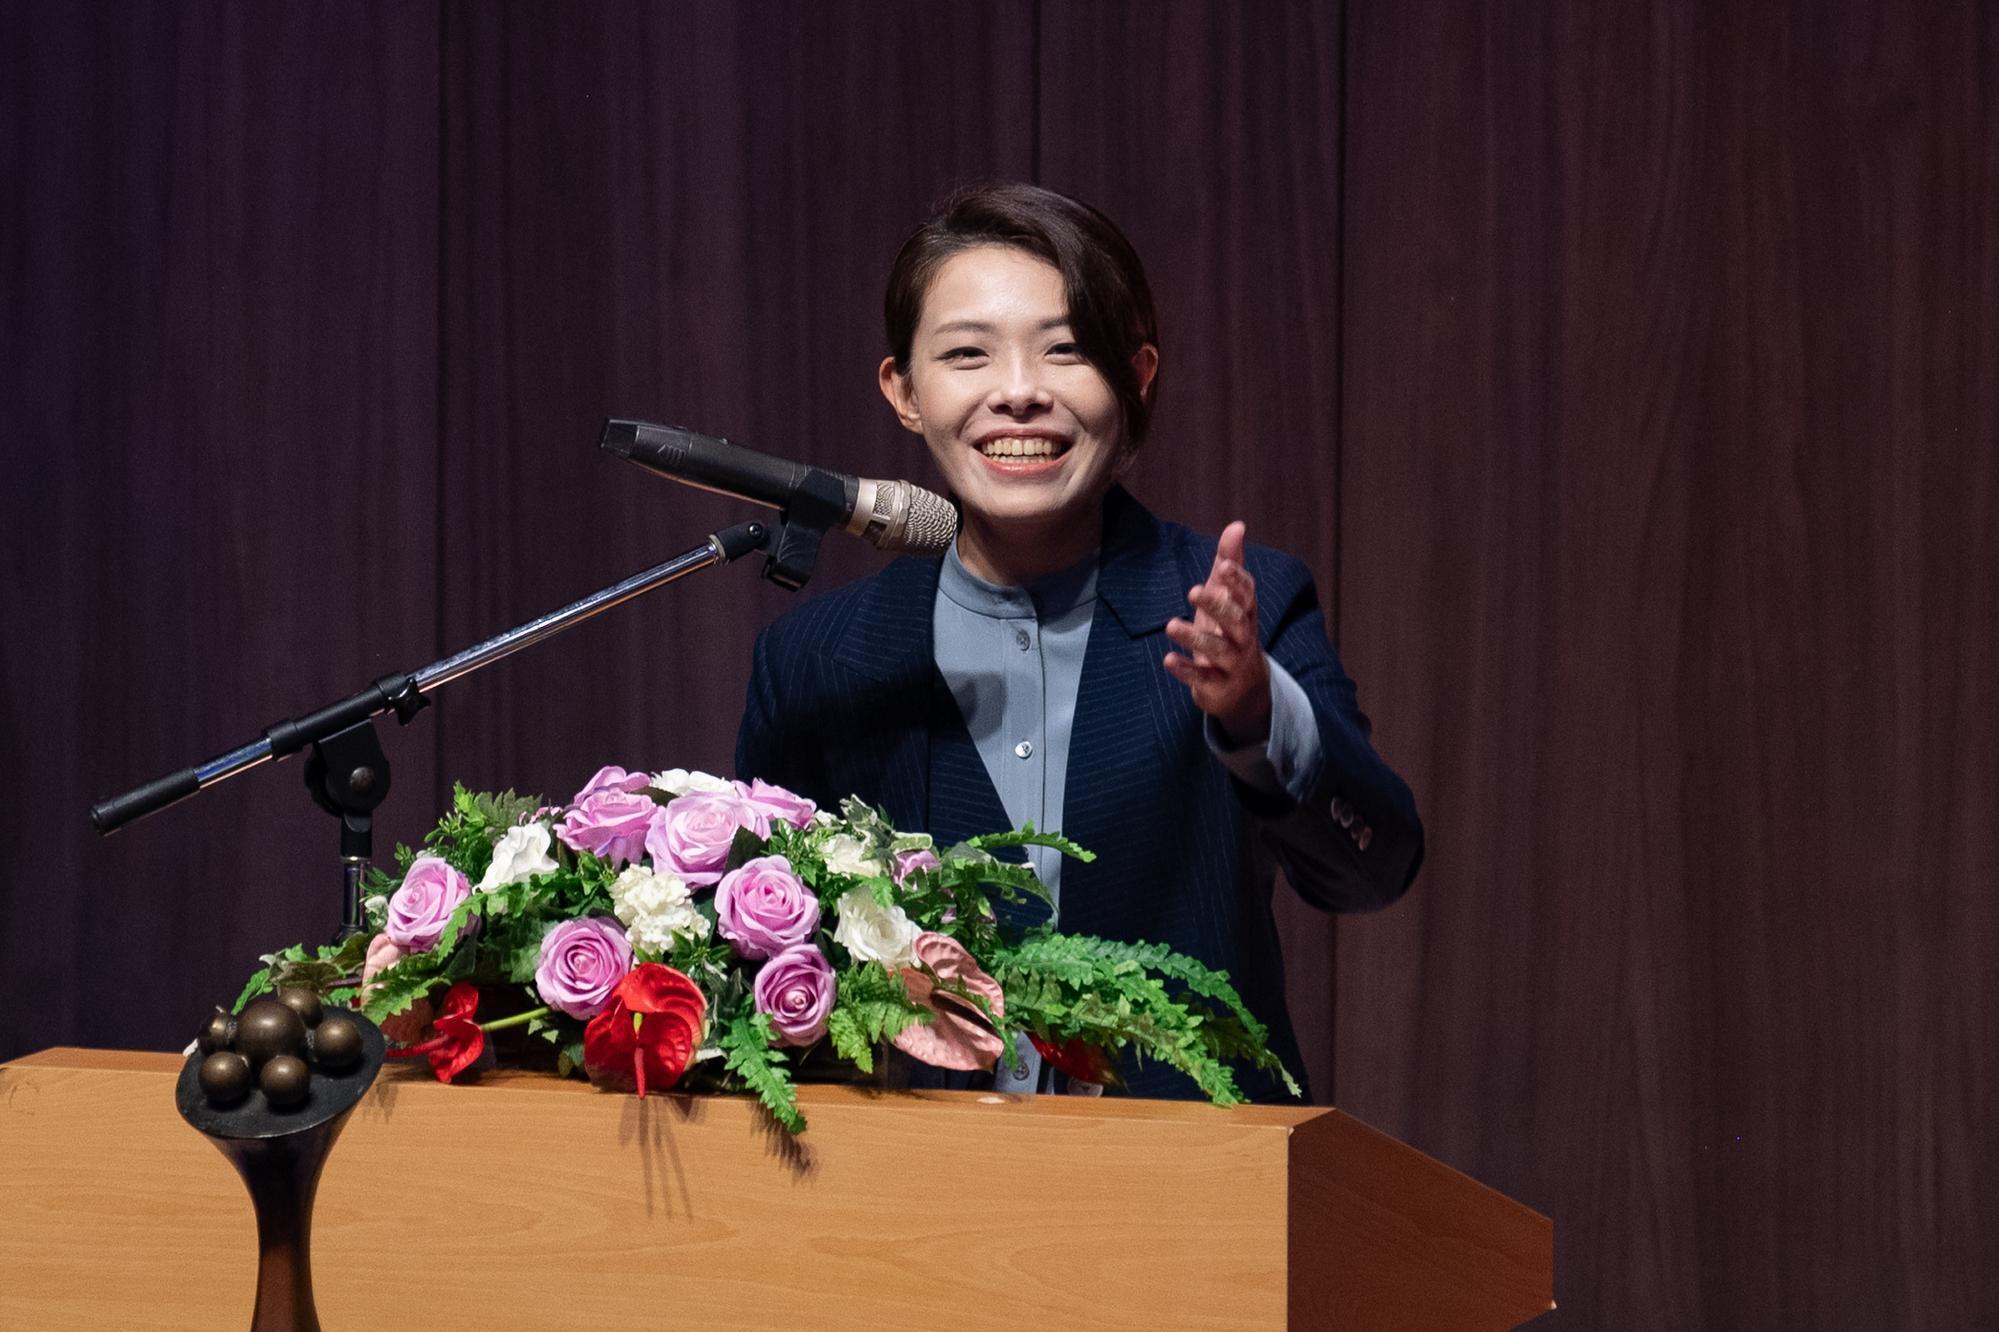 Hsinchu City Mayor Hung-An Kao (高虹安) wished for the games' success and encouraged athletes and students to enjoy themselves.